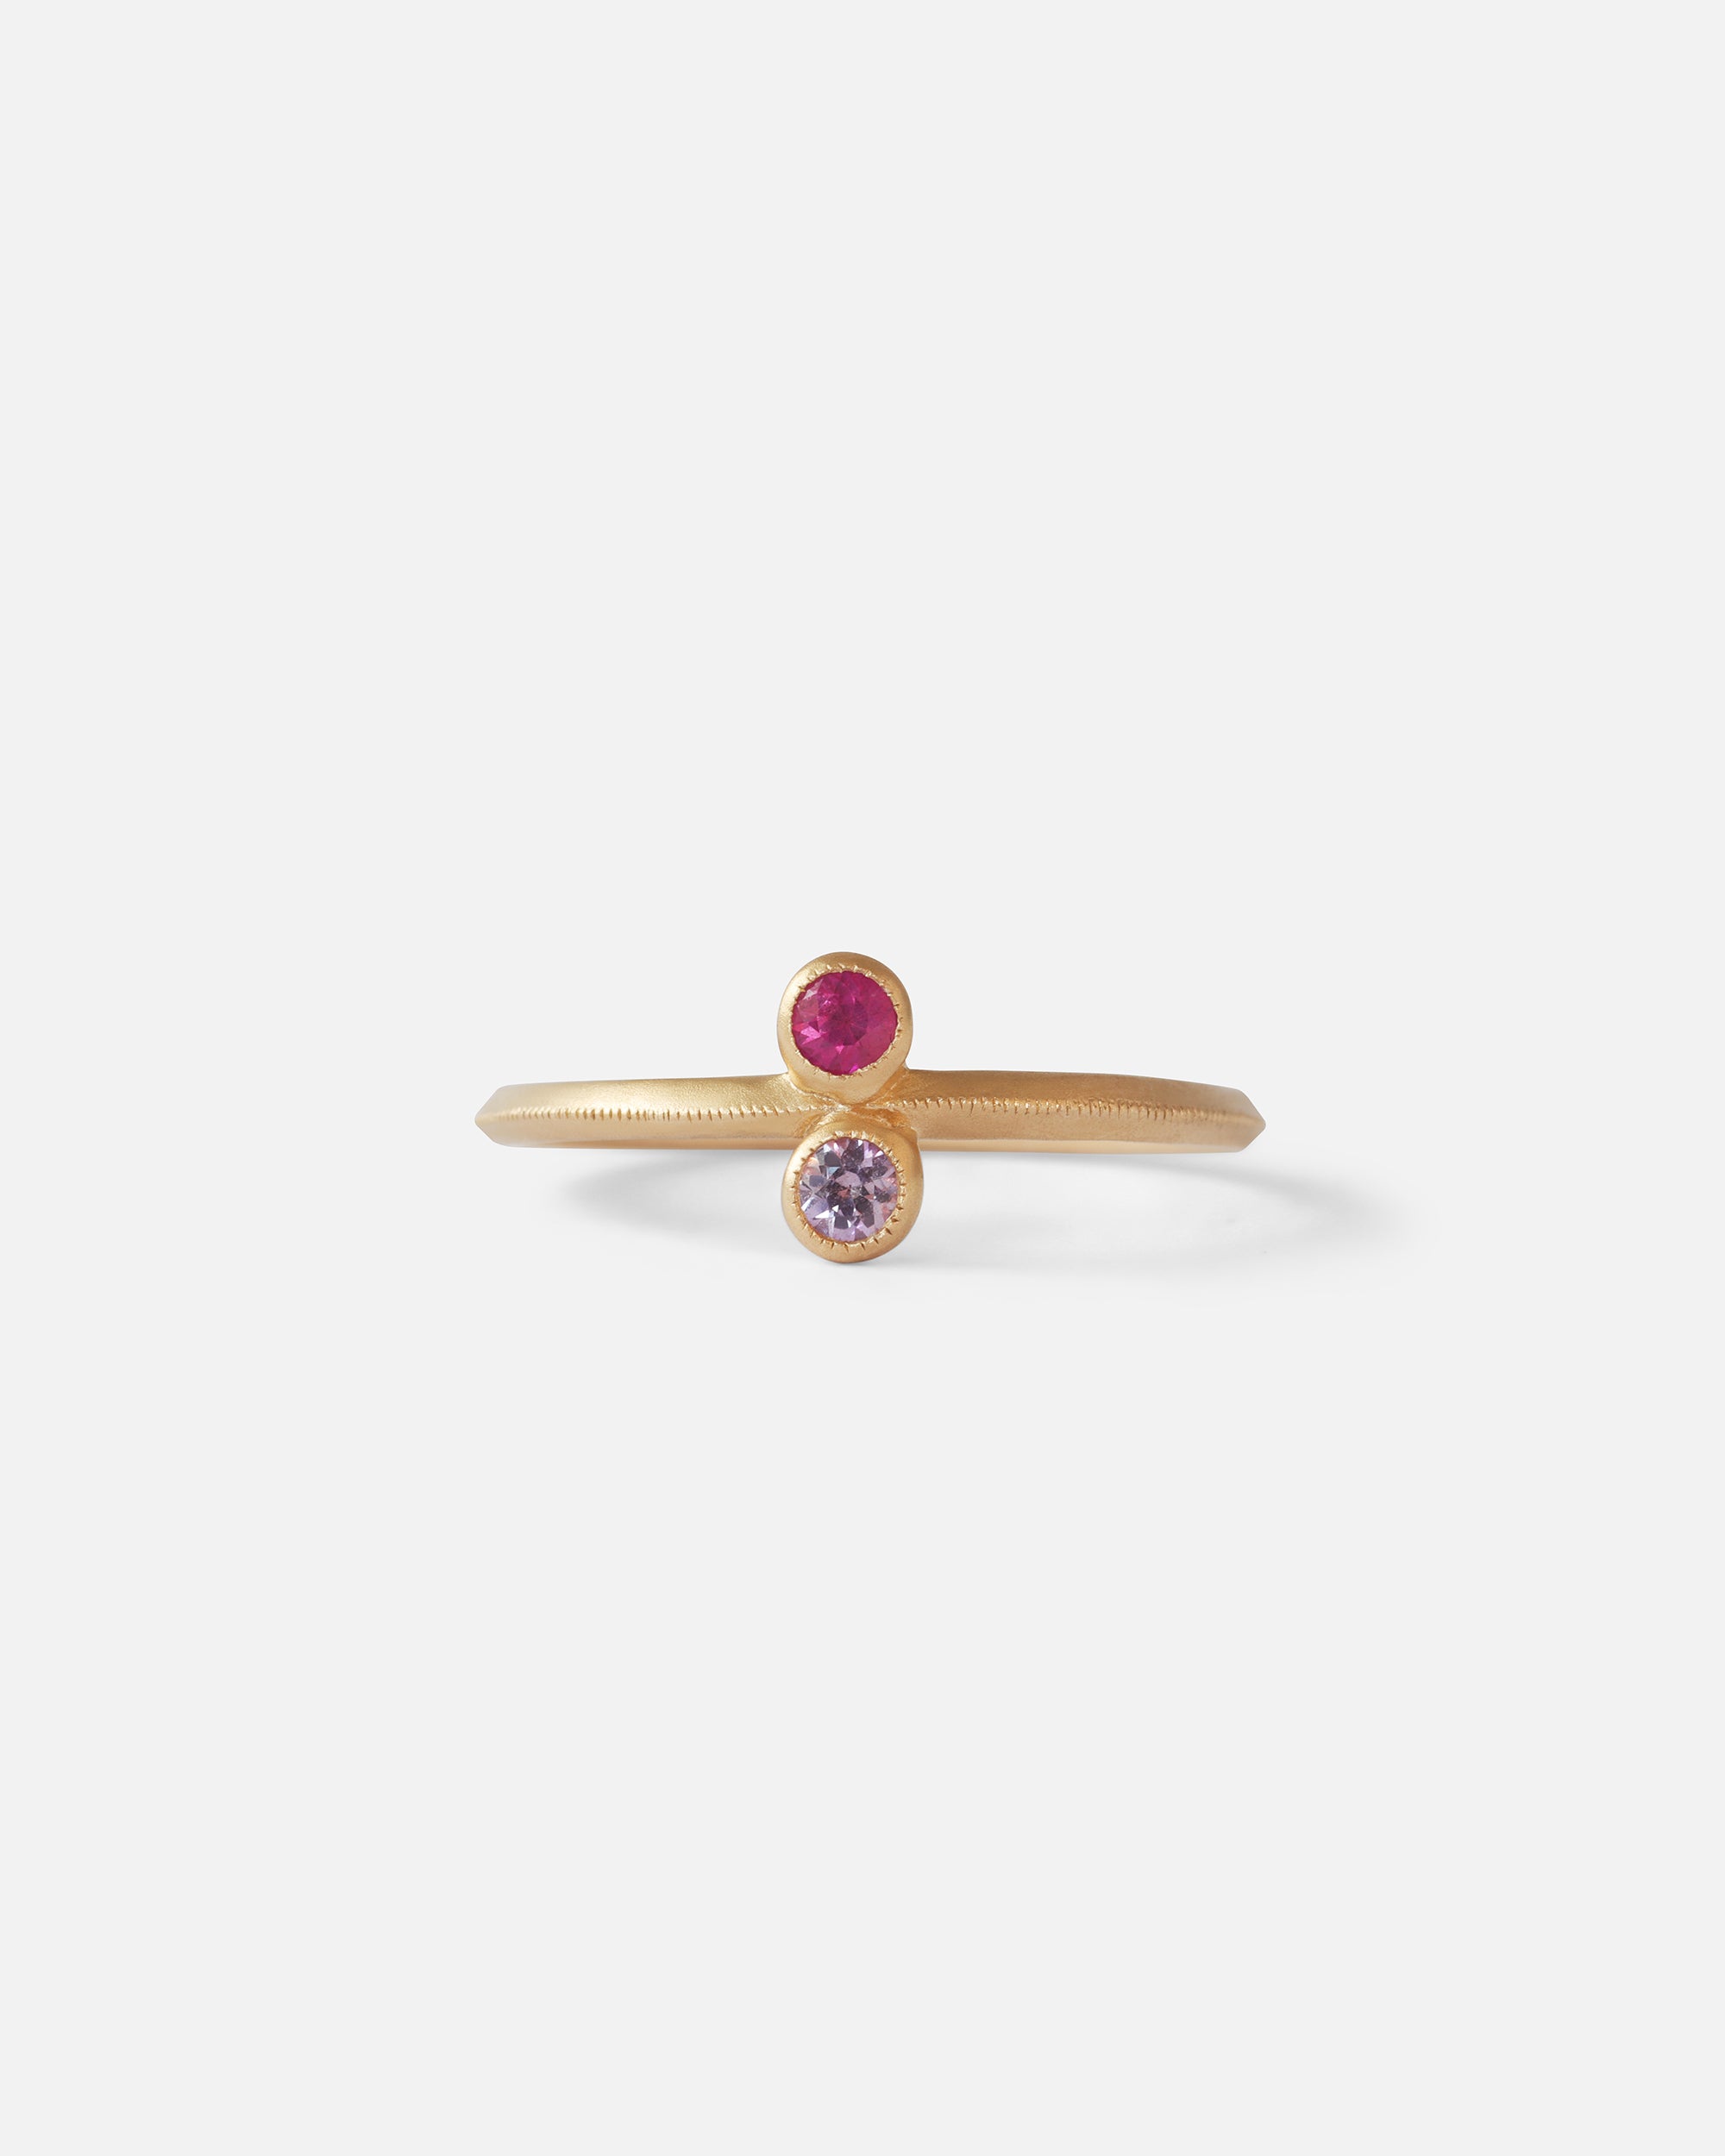 Melee Ball / Toi et Moi / Ruby and Pink Sapphire Ring By fitzgerald jewelry